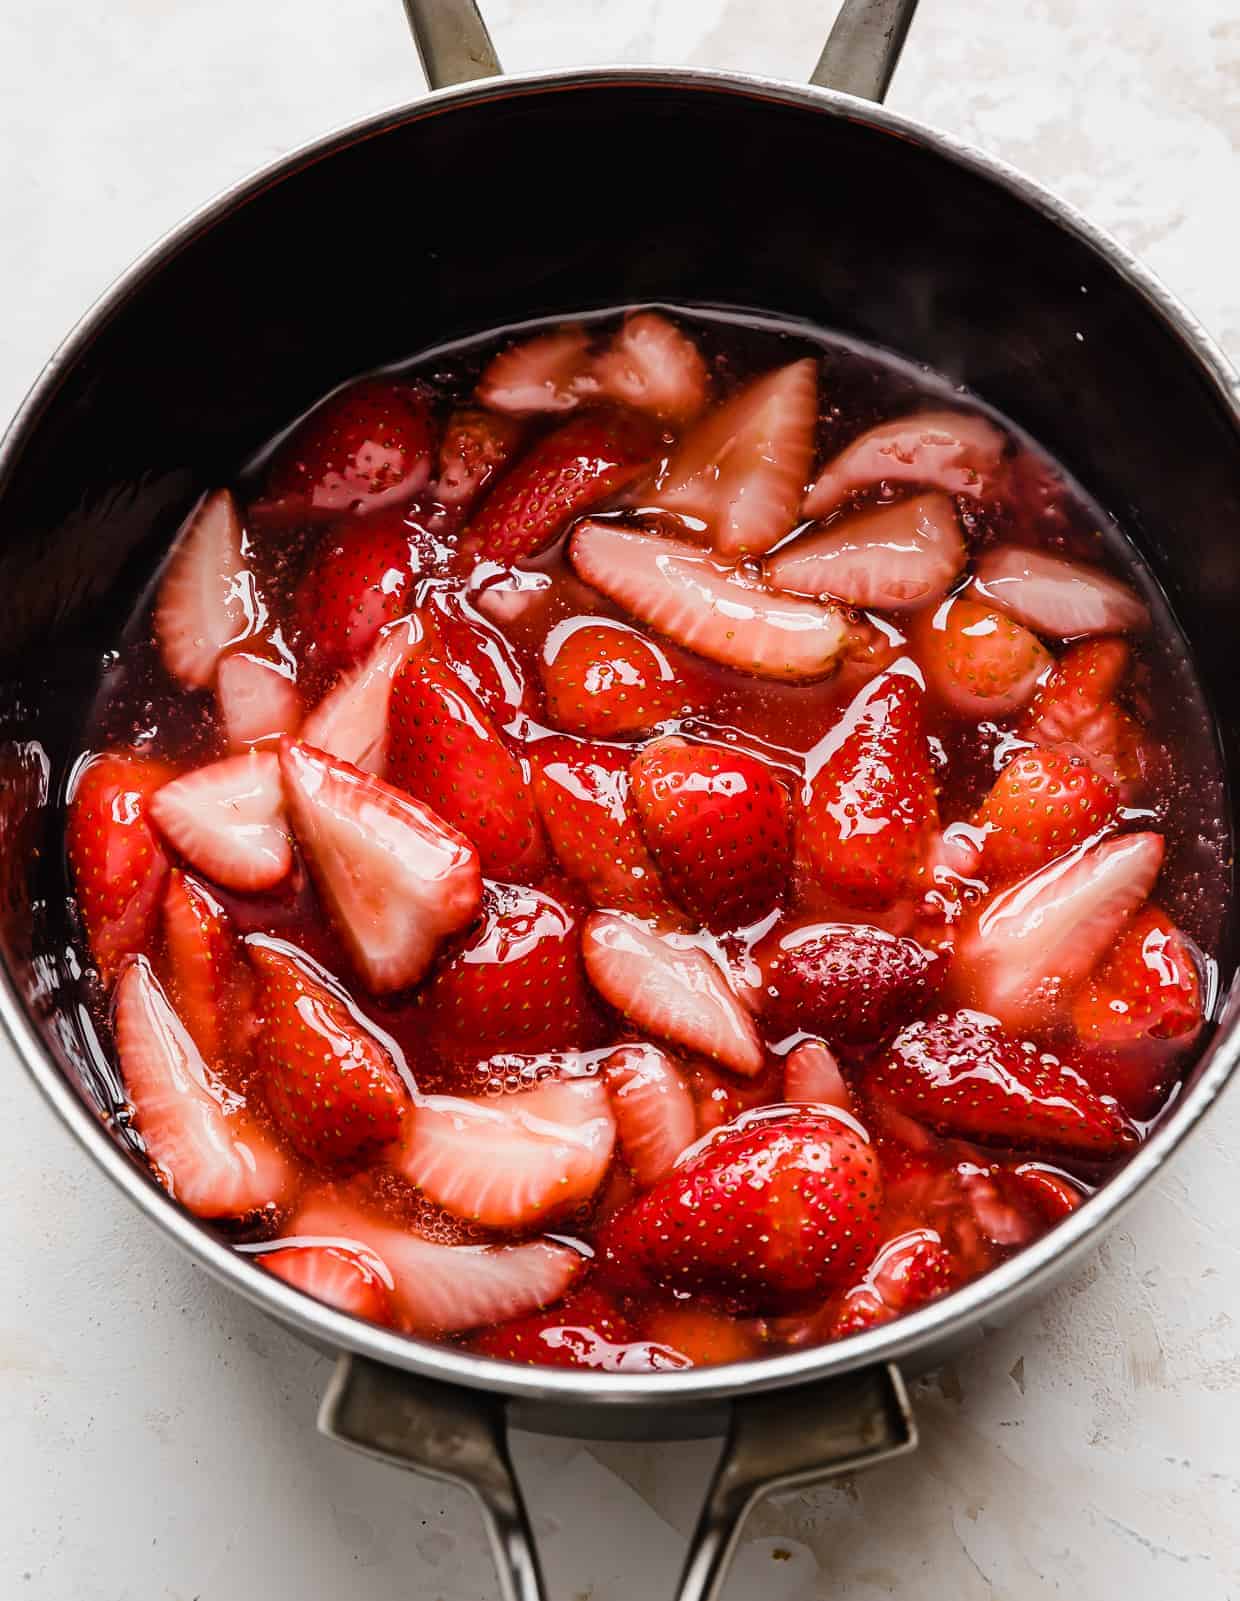 A homemade fresh strawberry sauce for Strawberry Shortcake Trifle in a black saucepan.